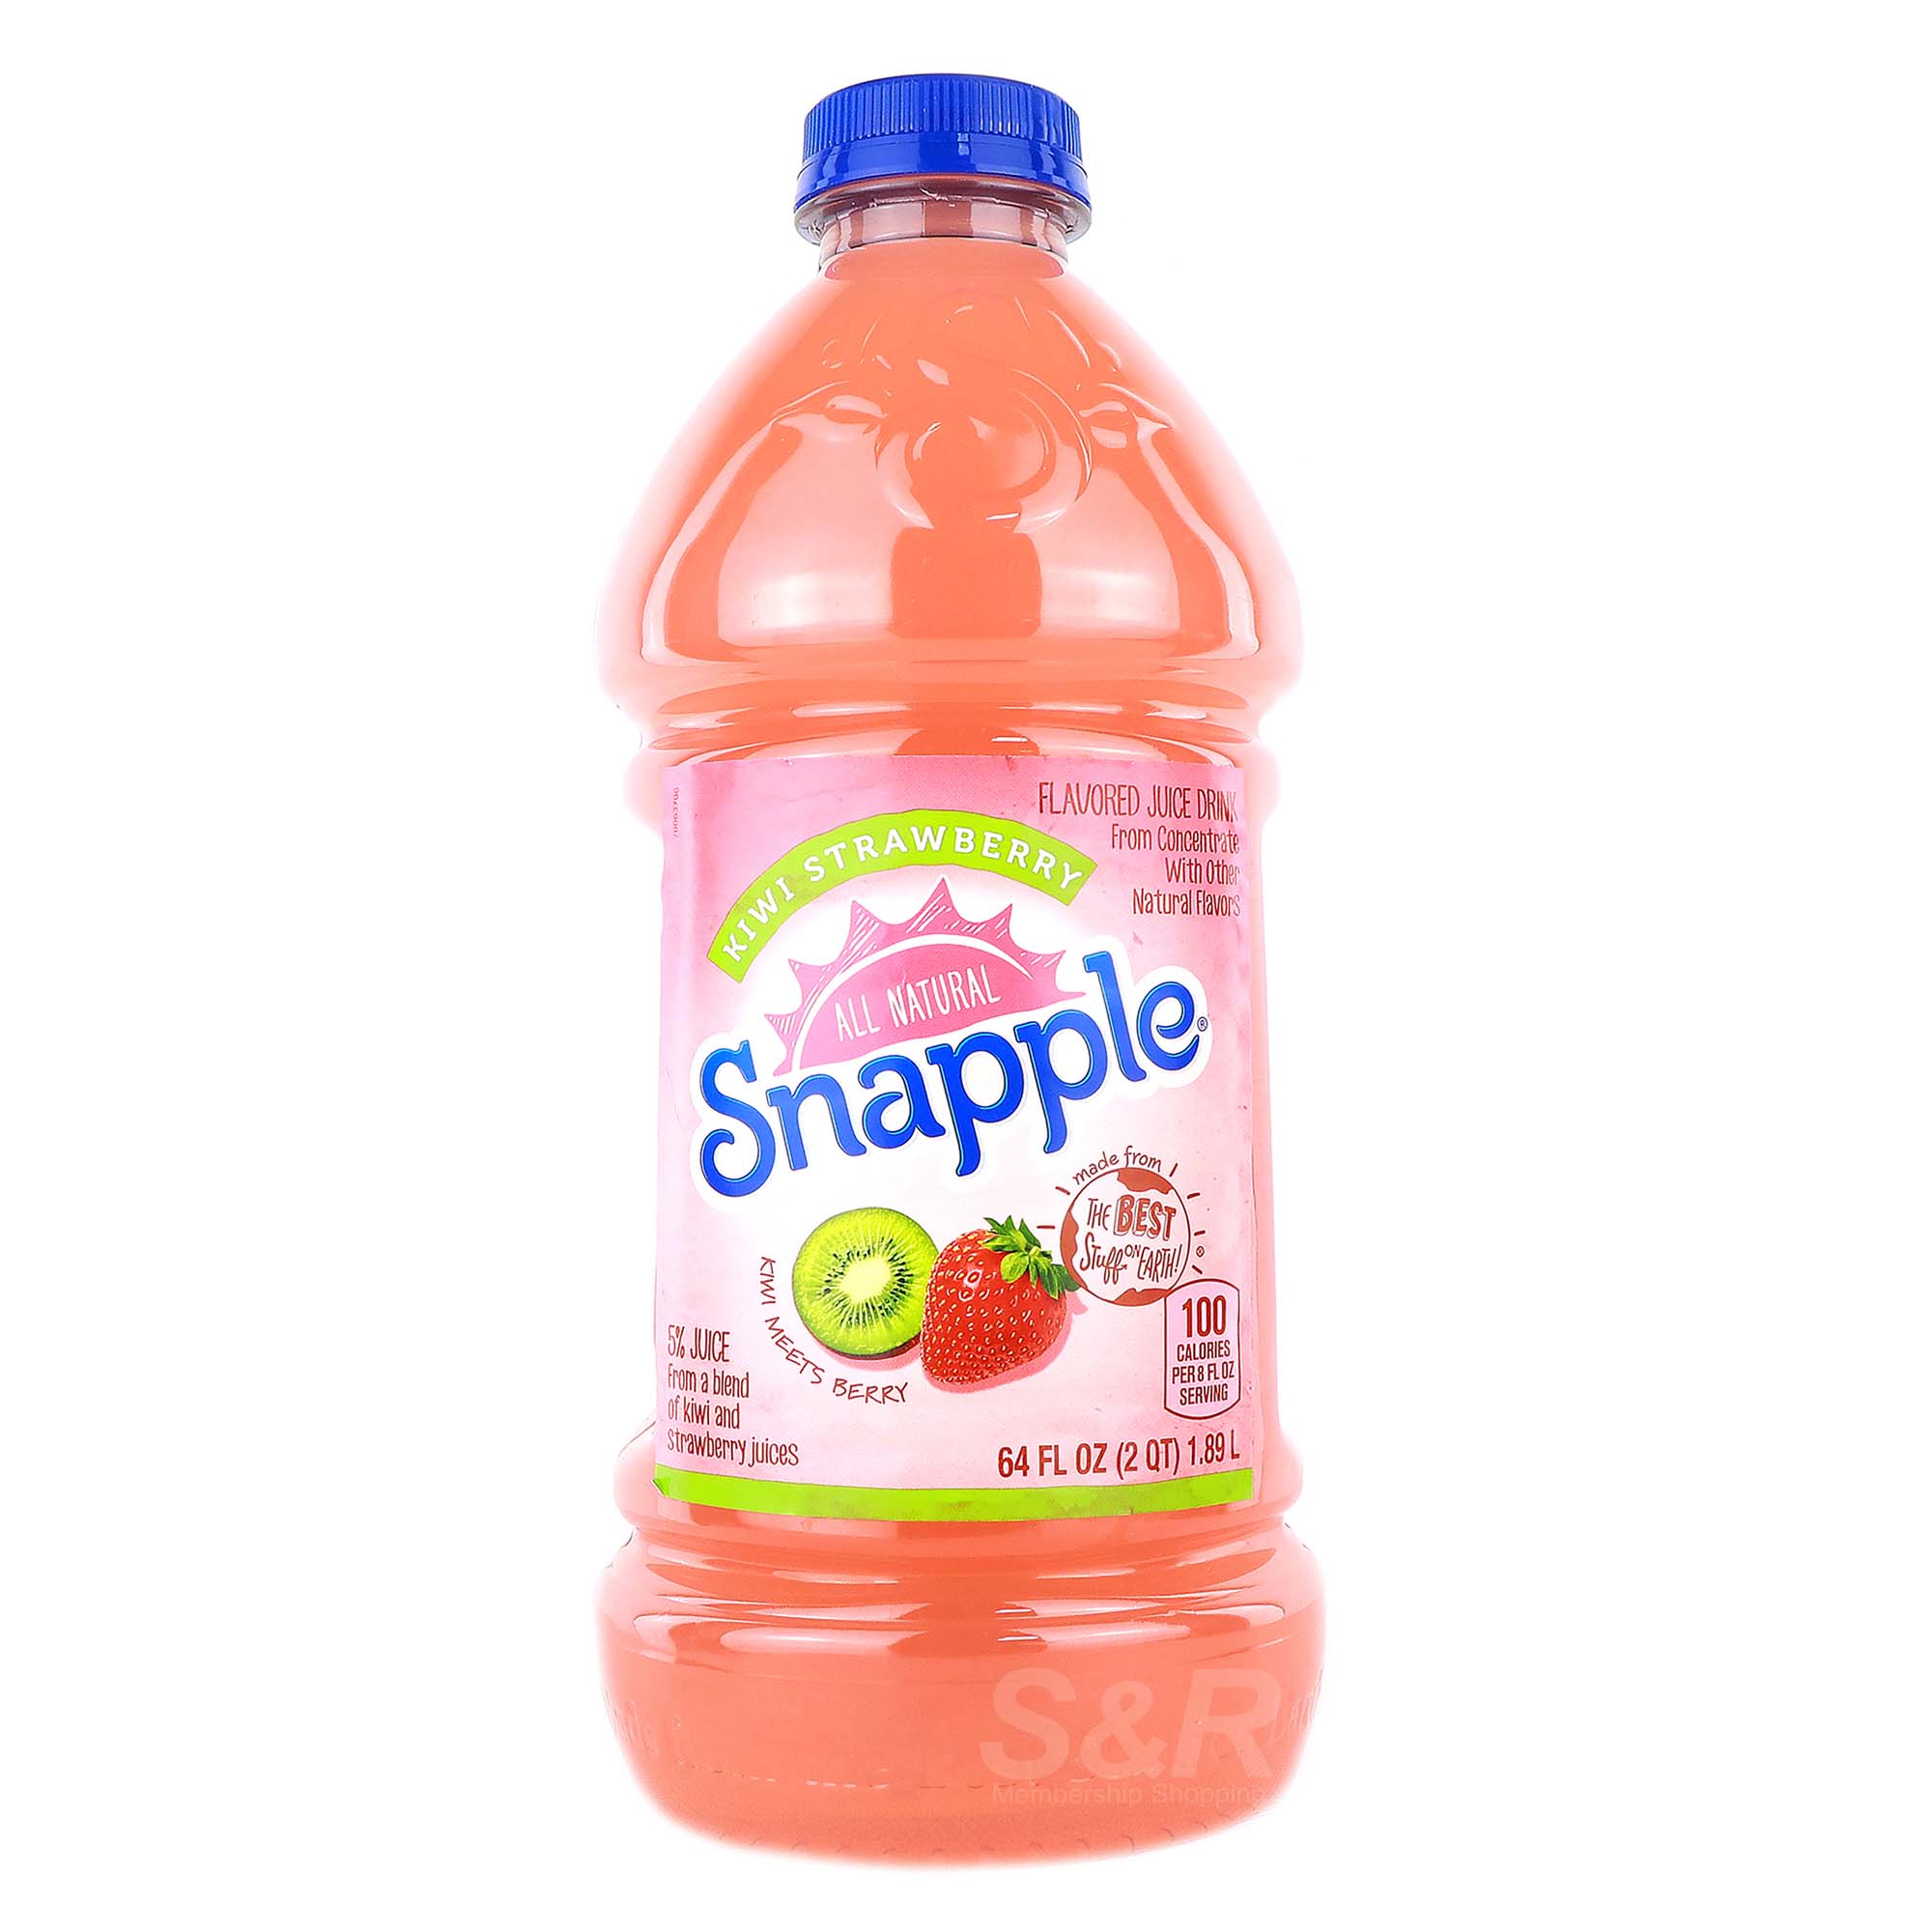 Snapple All Natural Kiwi Strawberry Flavor Juice Drinks 1.89L